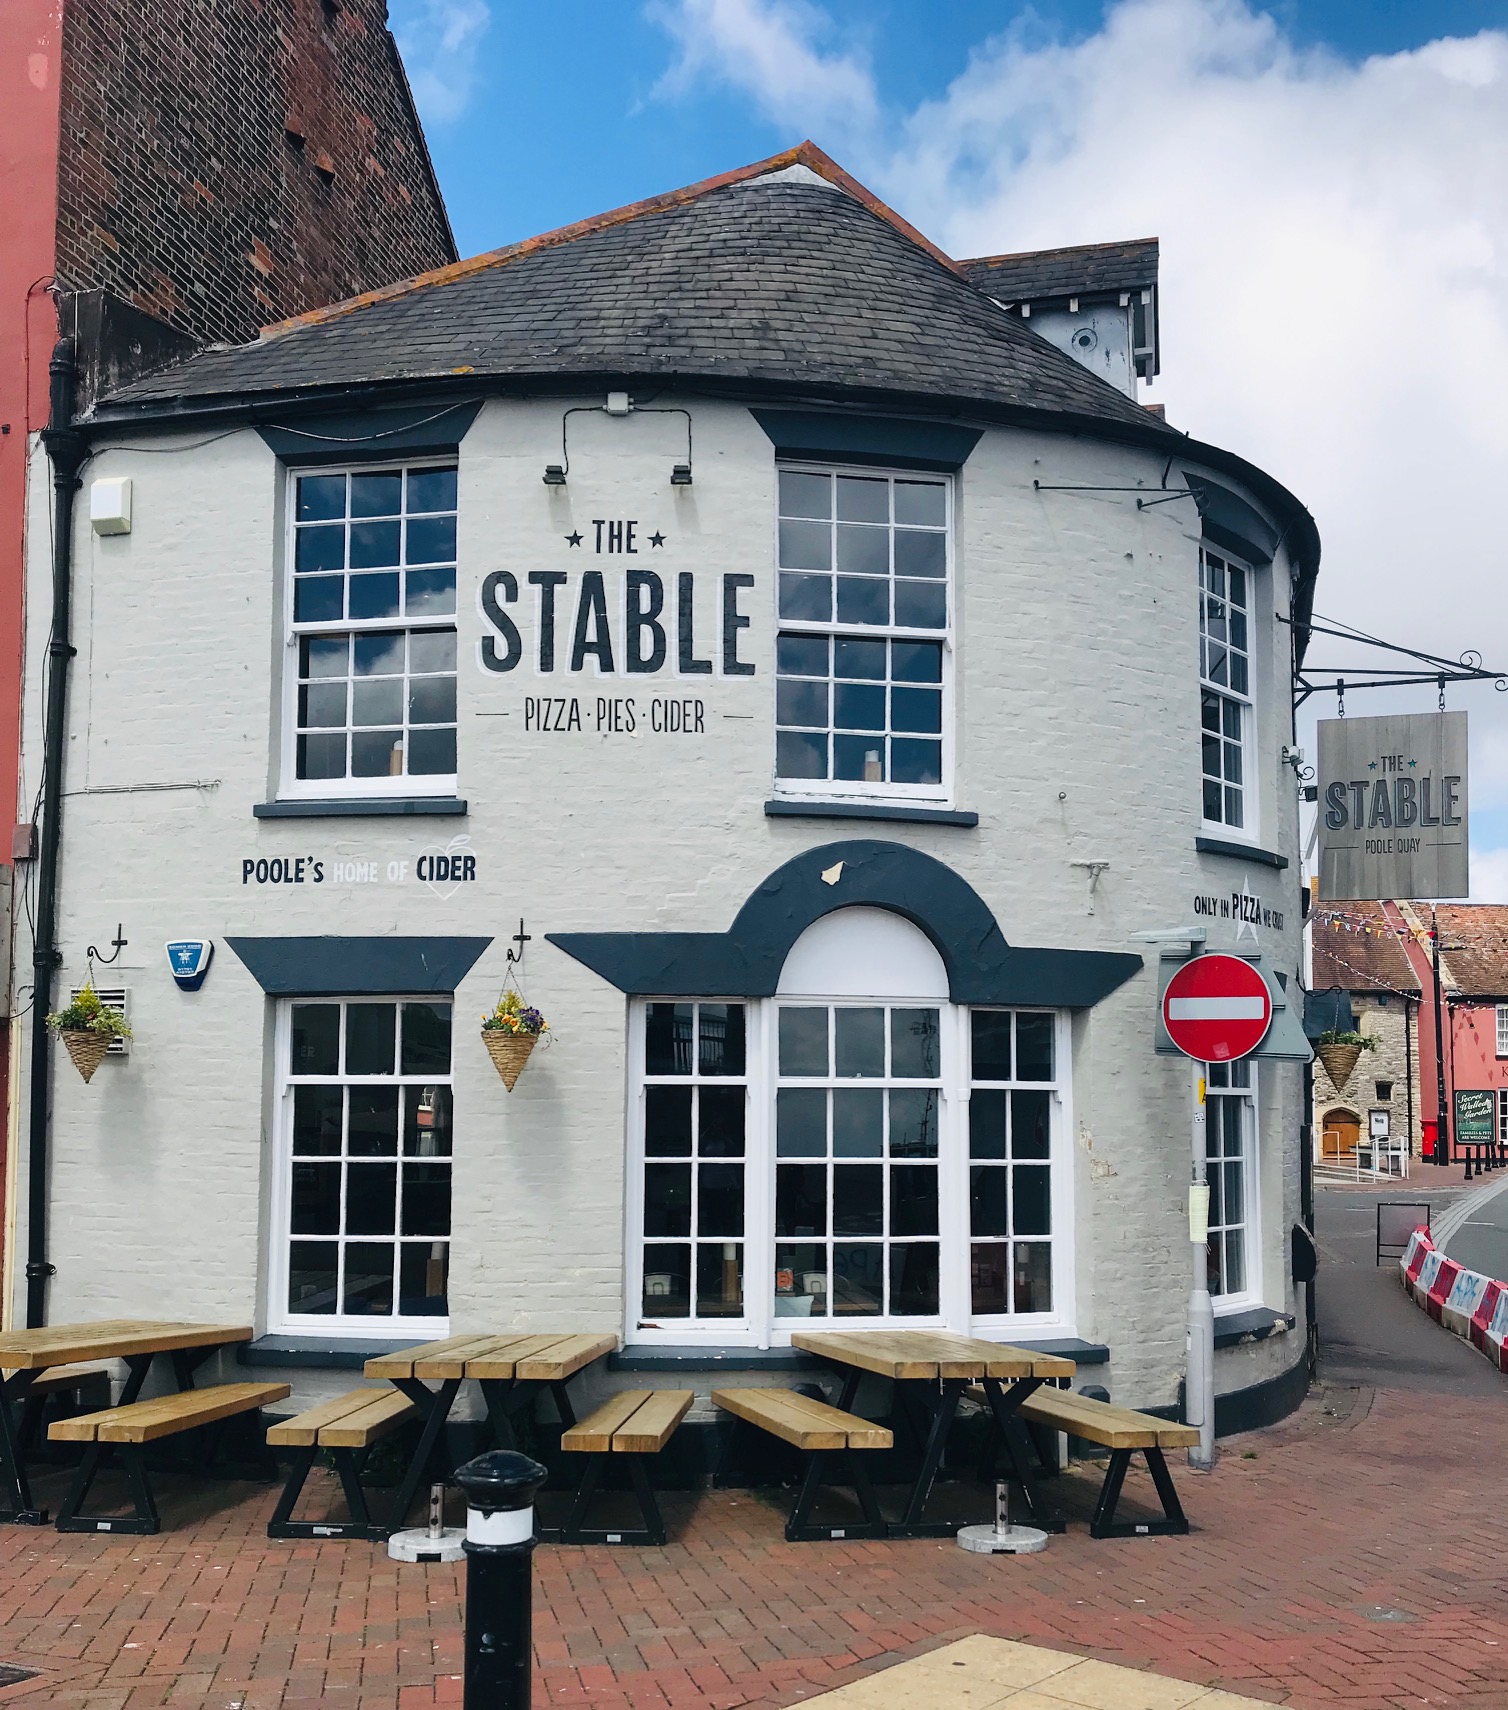 Review of The Stable Pizza in Poole